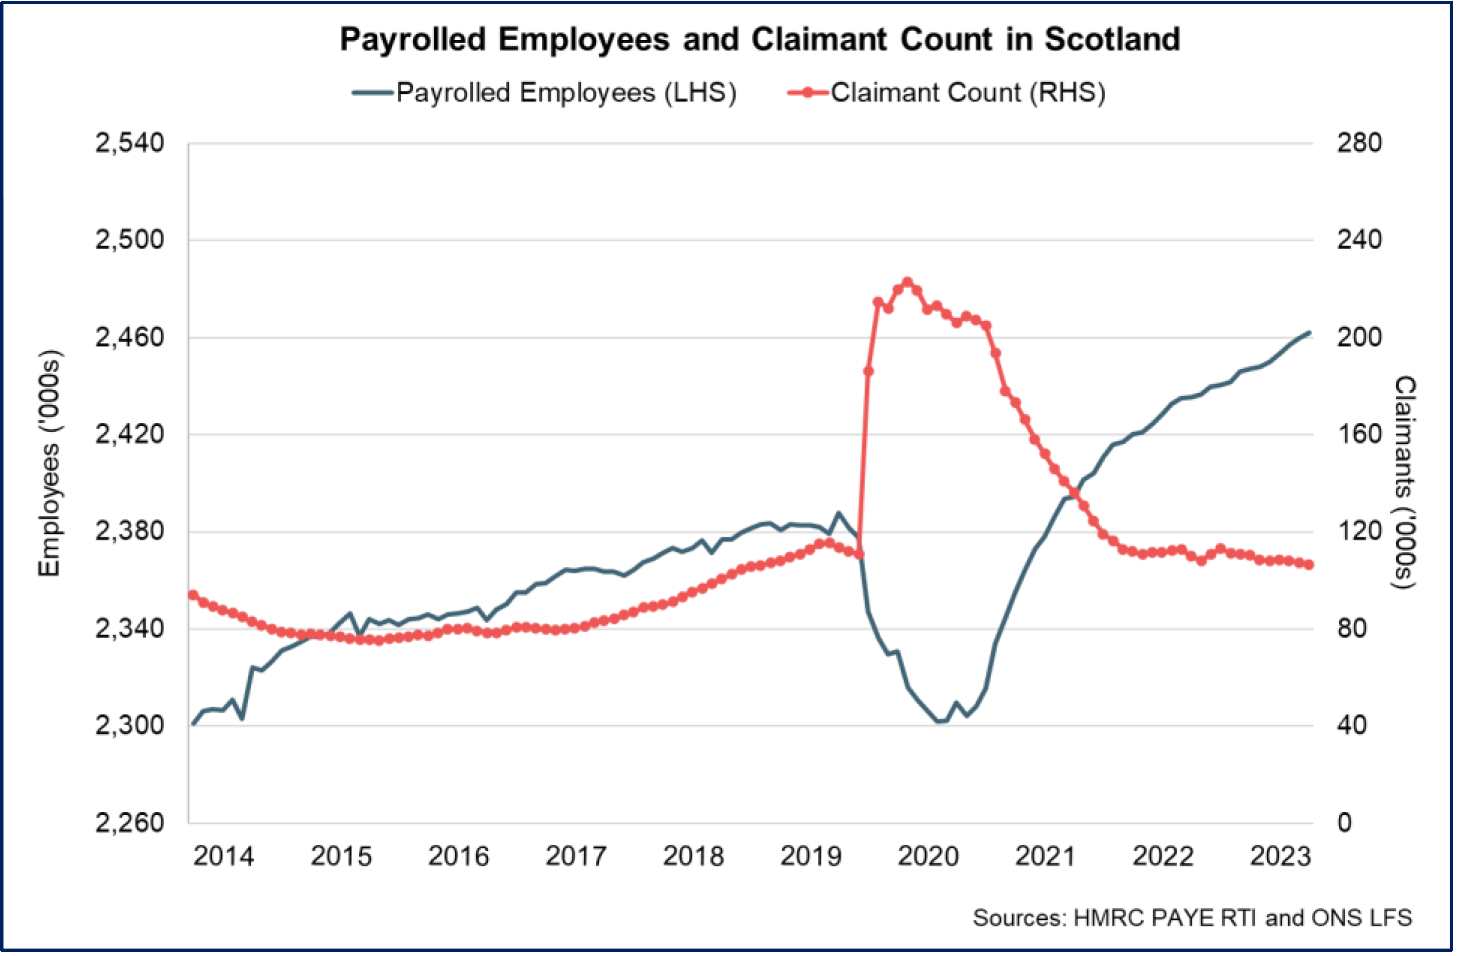 rise over the past year in the number of payrolled employees and fall in the claimant count